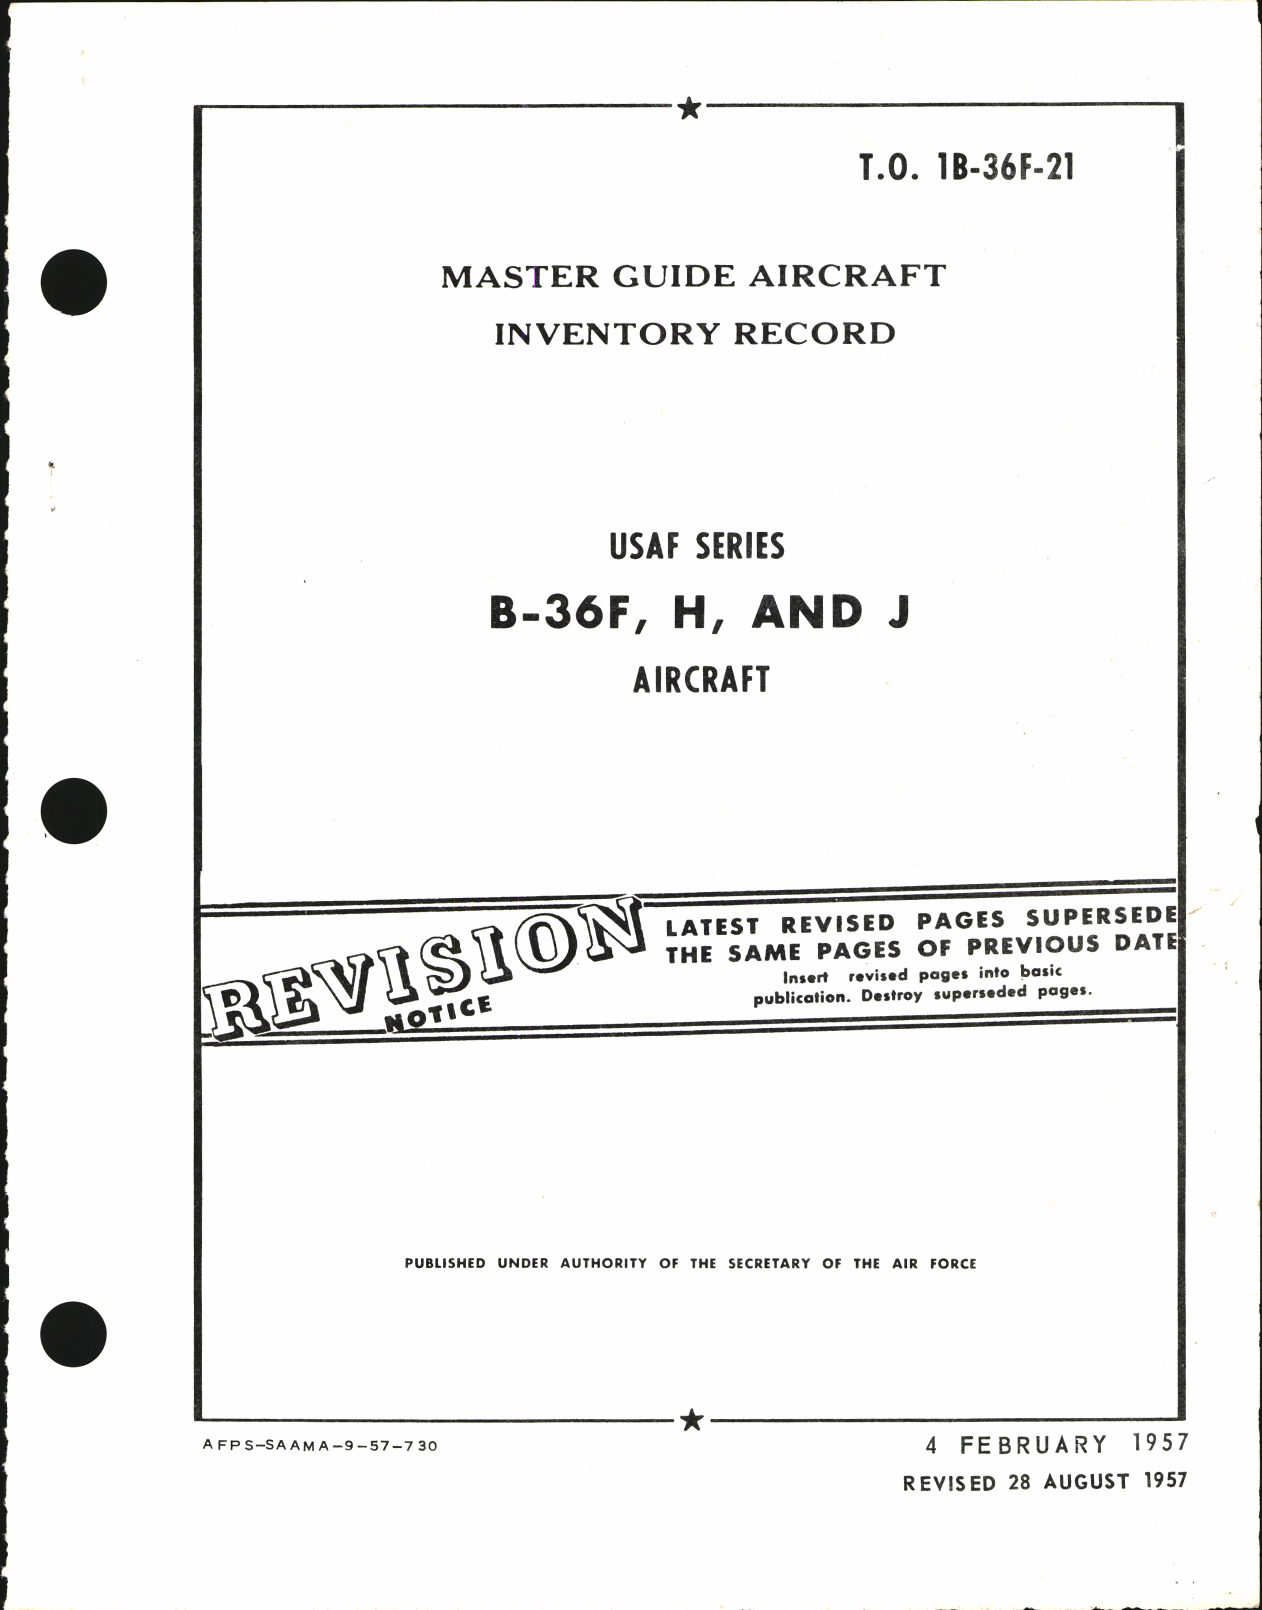 Sample page 1 from AirCorps Library document: Master Guide Aircraft Inventory Record for B-36F, H, and J Aircraft